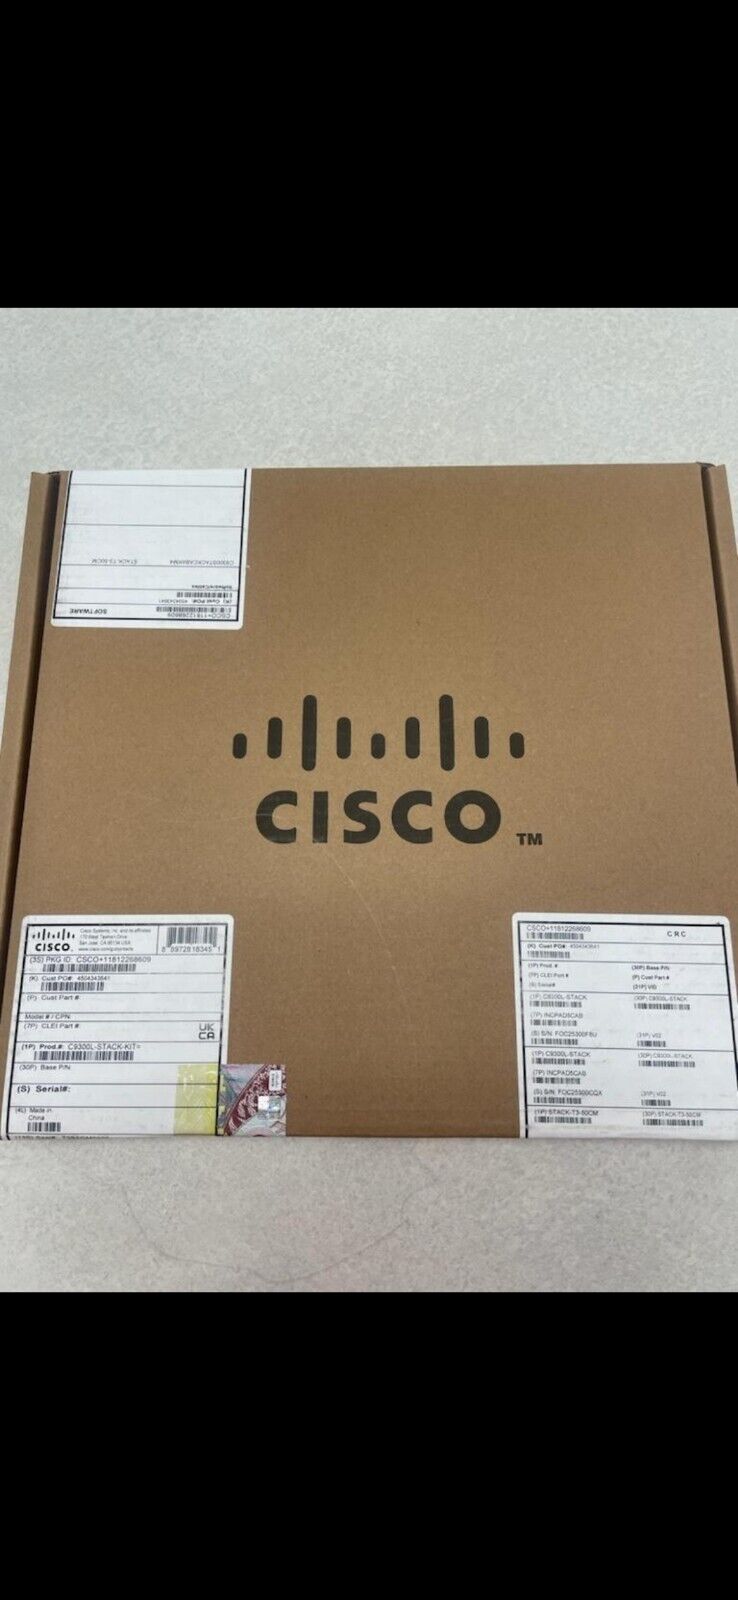 NEW SEALED Cisco C9300L-STACK-KIT ( 2 AVAILABLE )